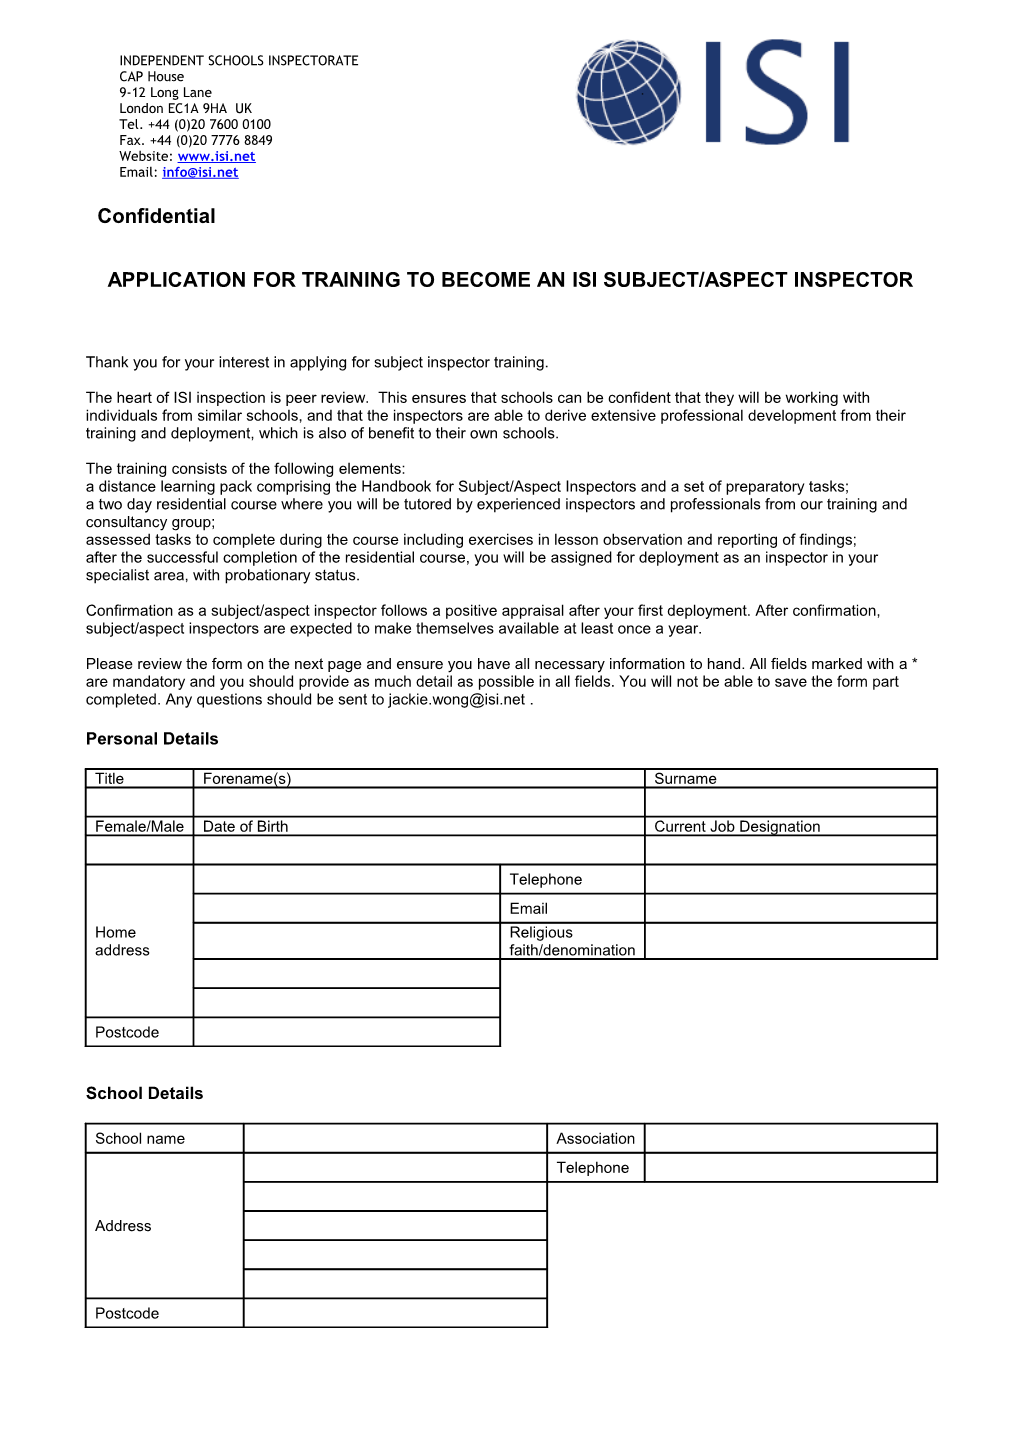 Application for Training to Become an Isi Subject/Aspect Inspector